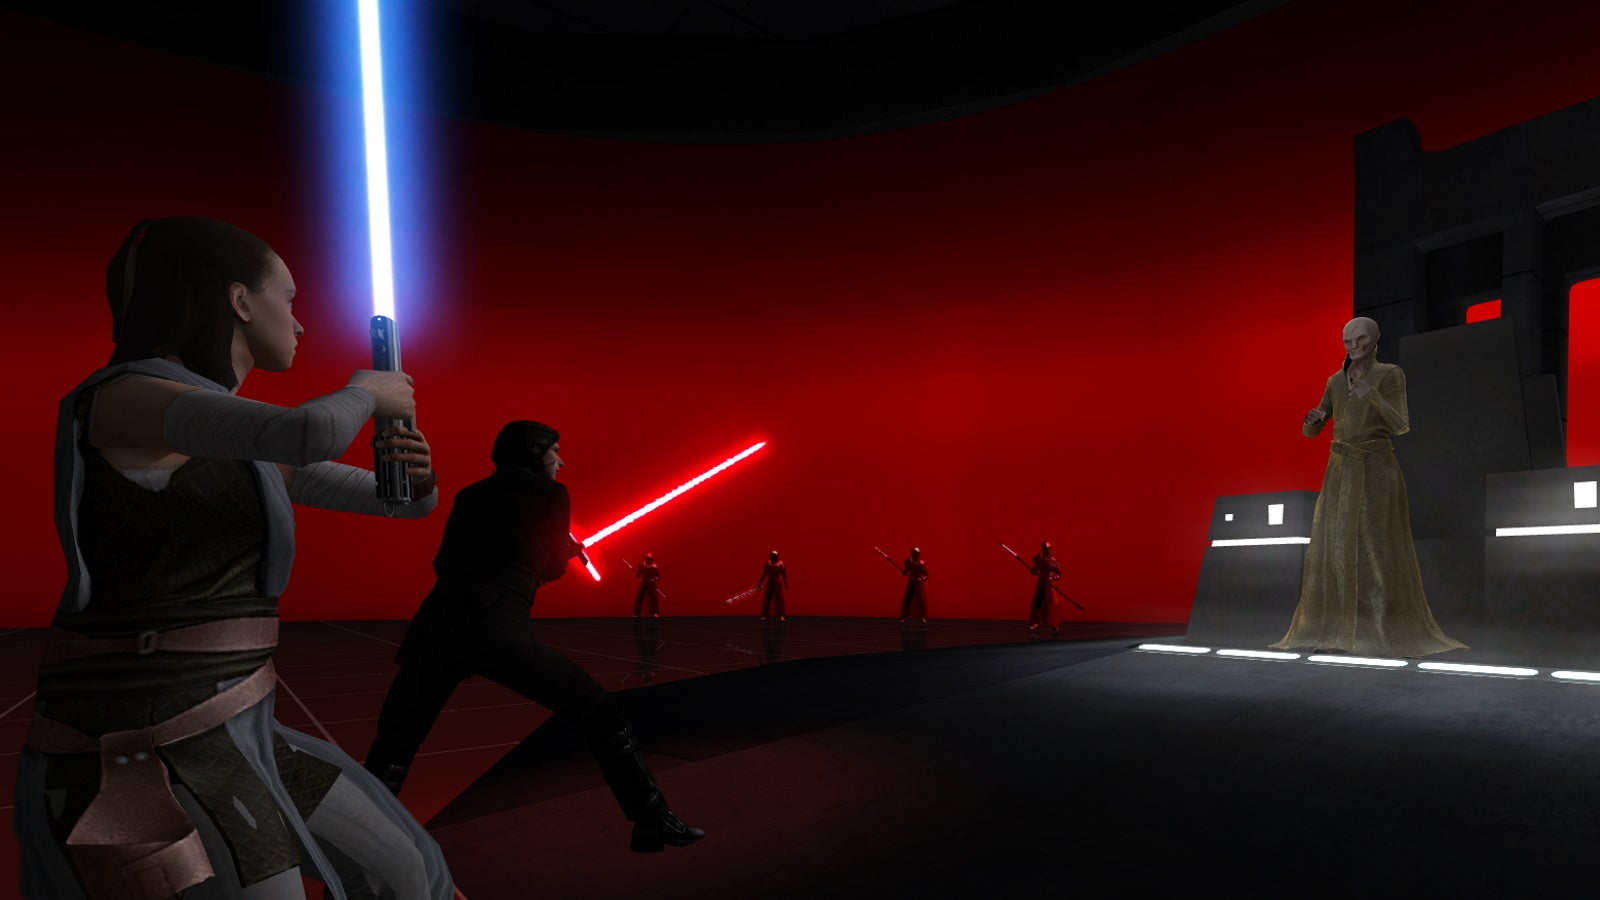 chris risto recommends how to mod jedi academy pic